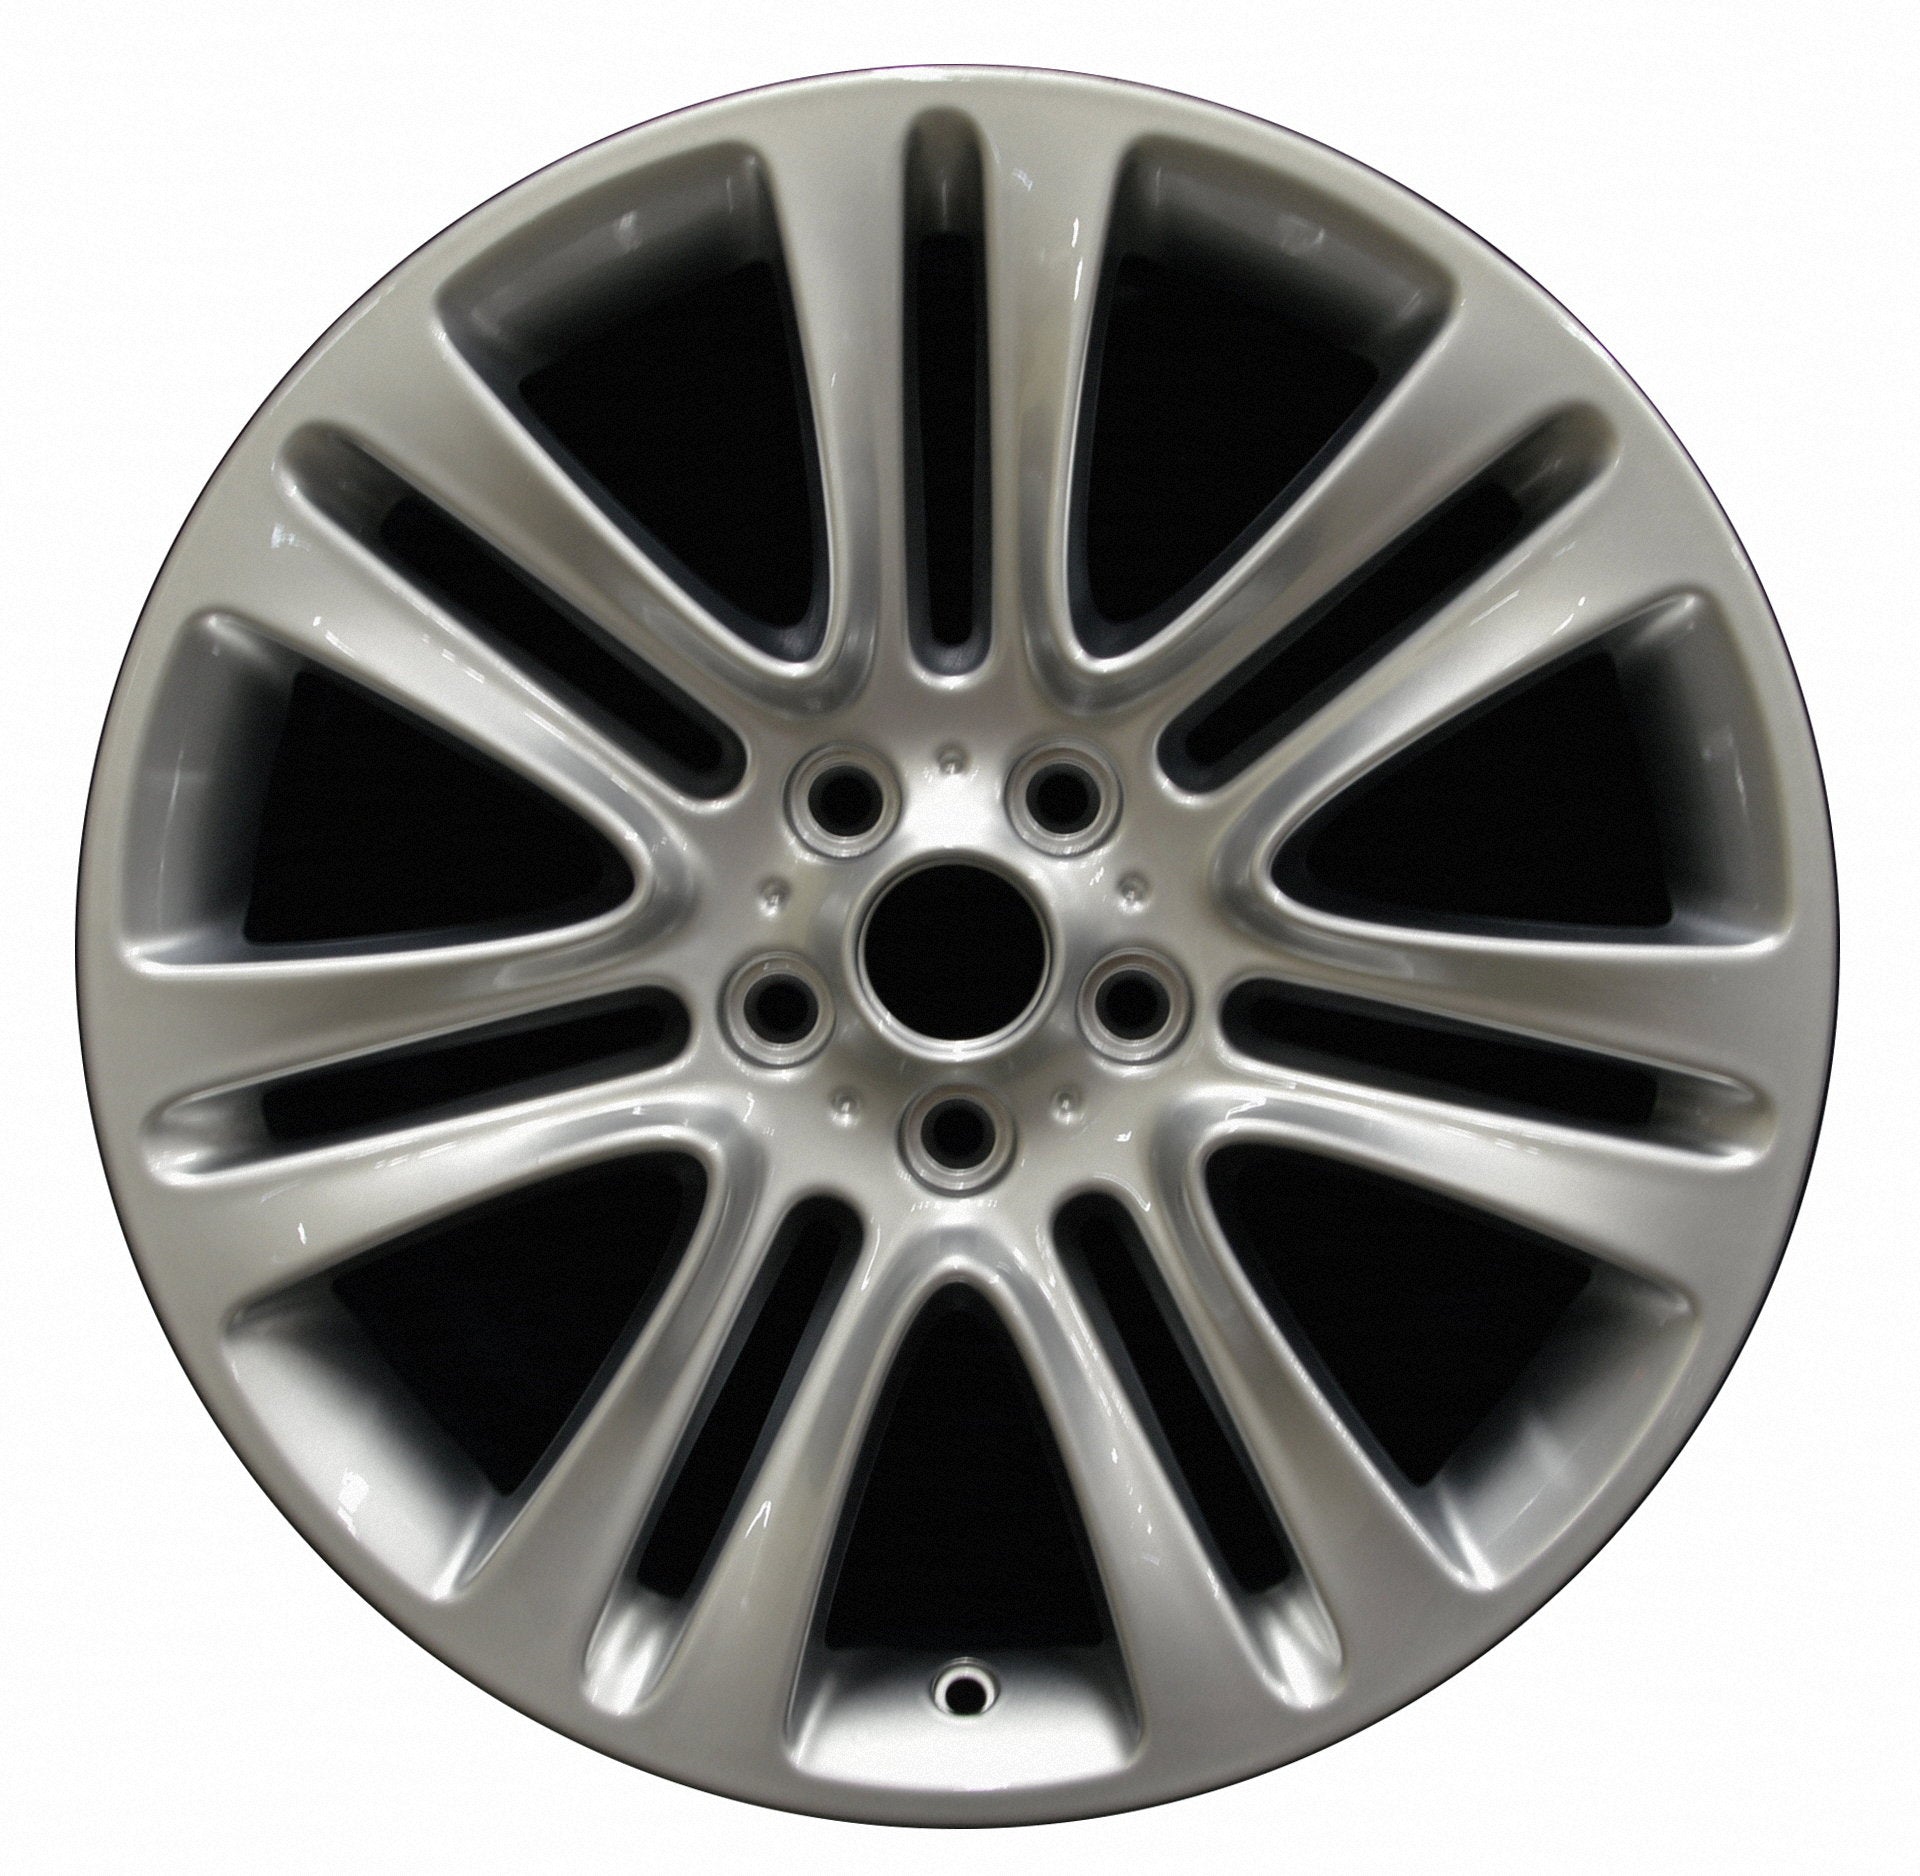 Lincoln MKZ  2013, 2014, 2015, 2016 Factory OEM Car Wheel Size 18x8 Alloy WAO.3952.LS100V2.FFBRT